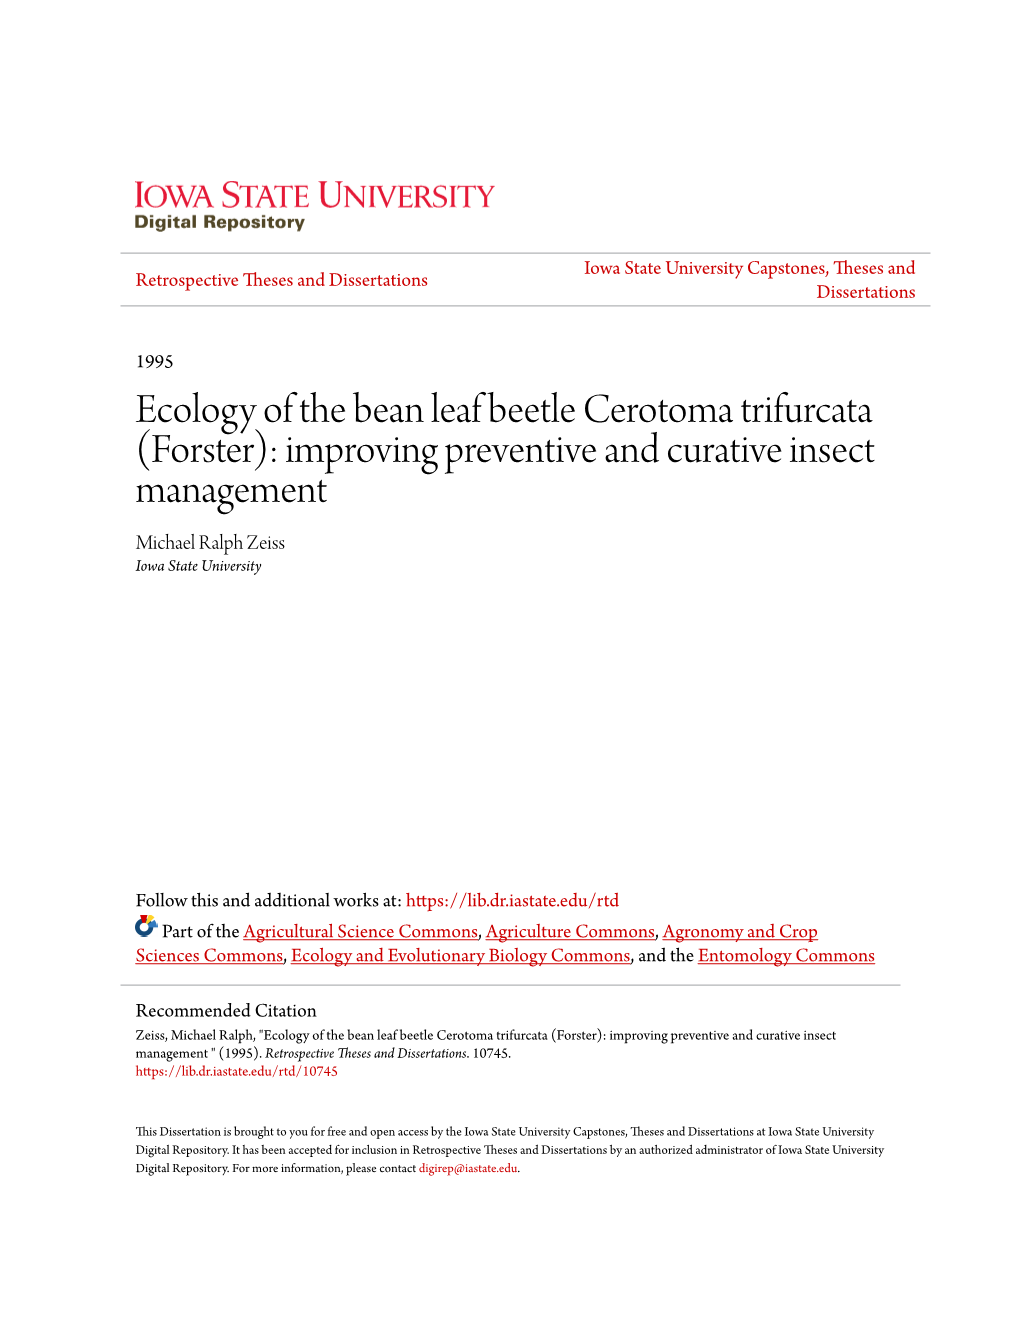 Ecology of the Bean Leaf Beetle Cerotoma Trifurcata (Forster): Improving Preventive and Curative Insect Management Michael Ralph Zeiss Iowa State University